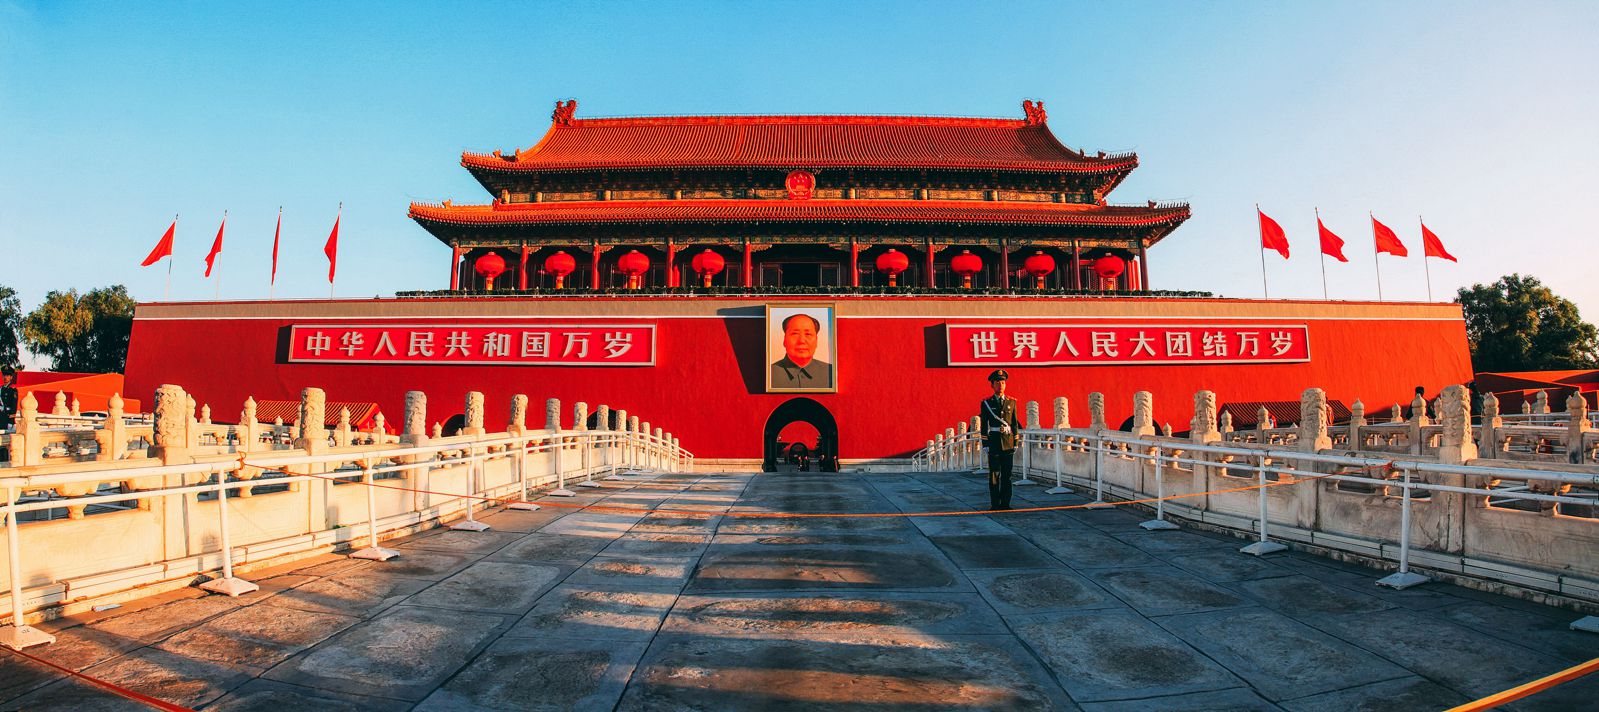 9 Places You Need To Visit In Beijing, China (2)